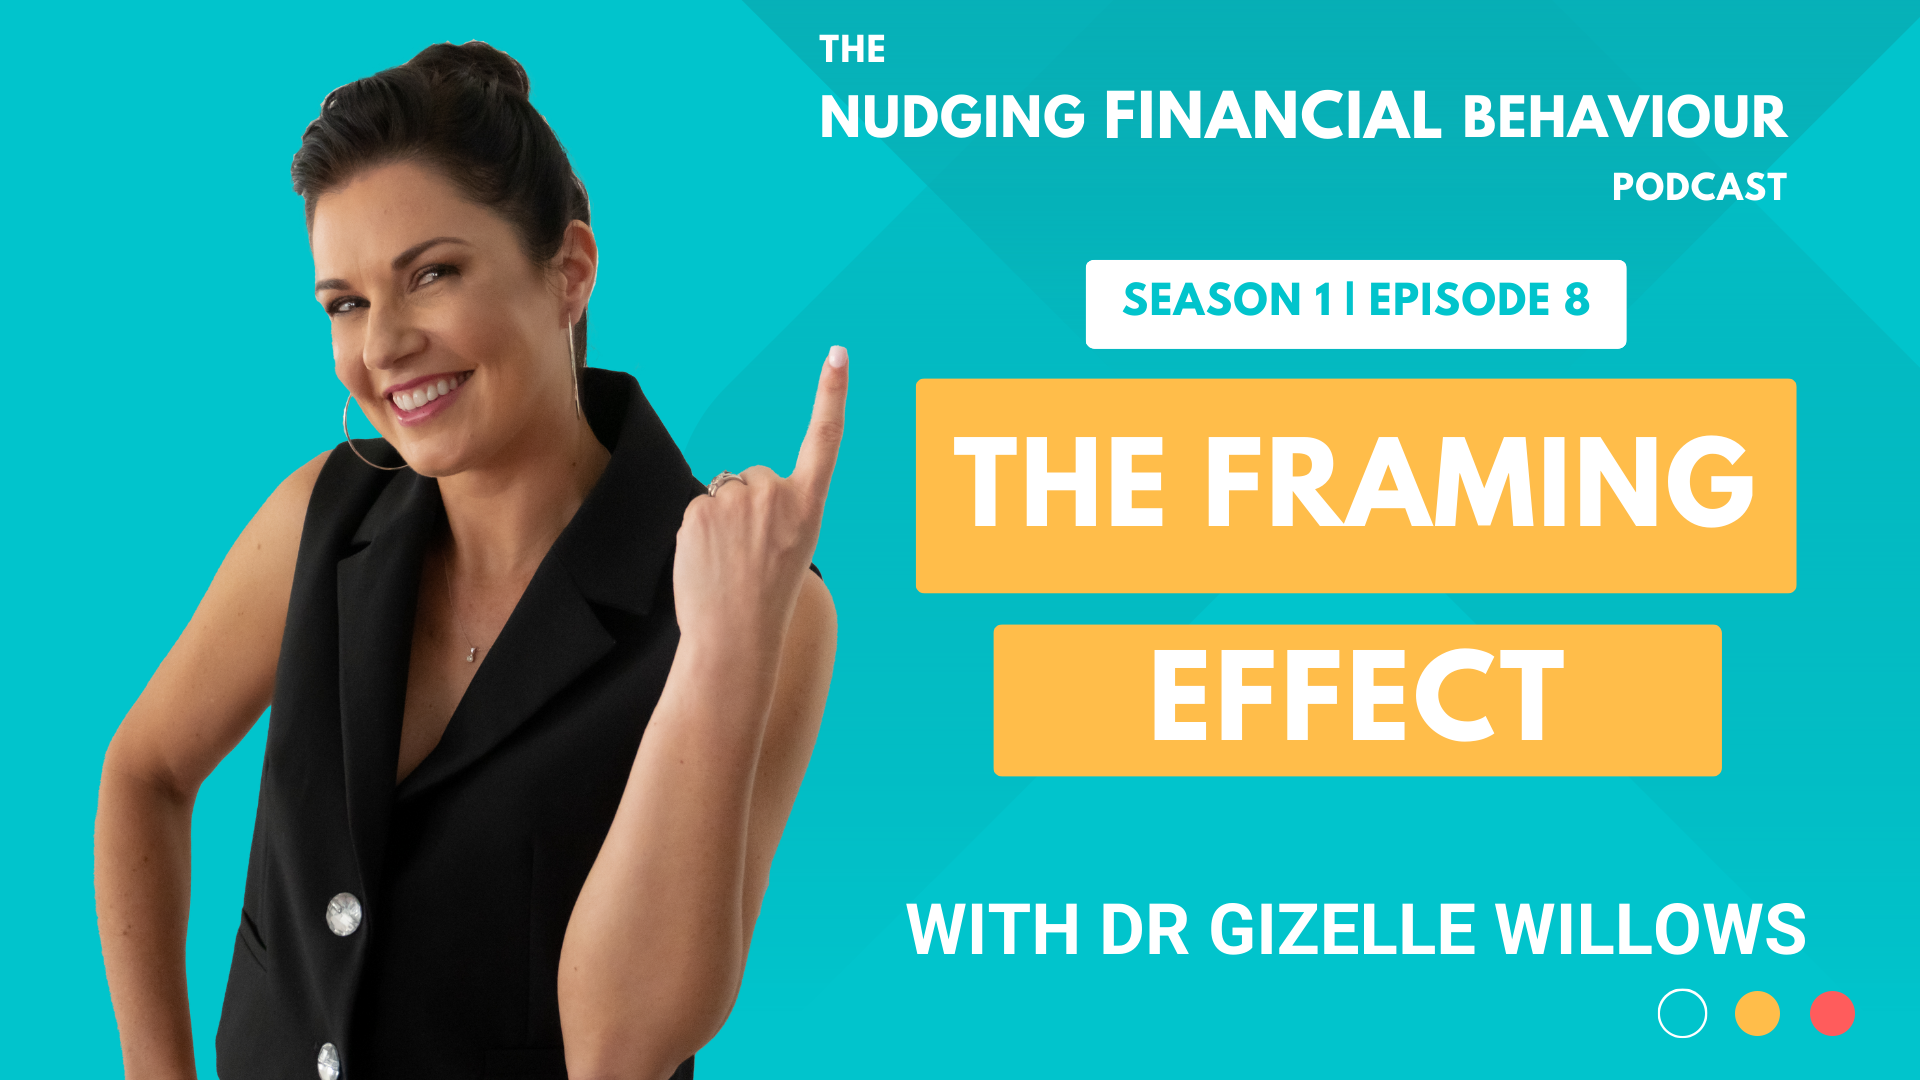 The framing effect on the Nudging Financial Behaviour podcast